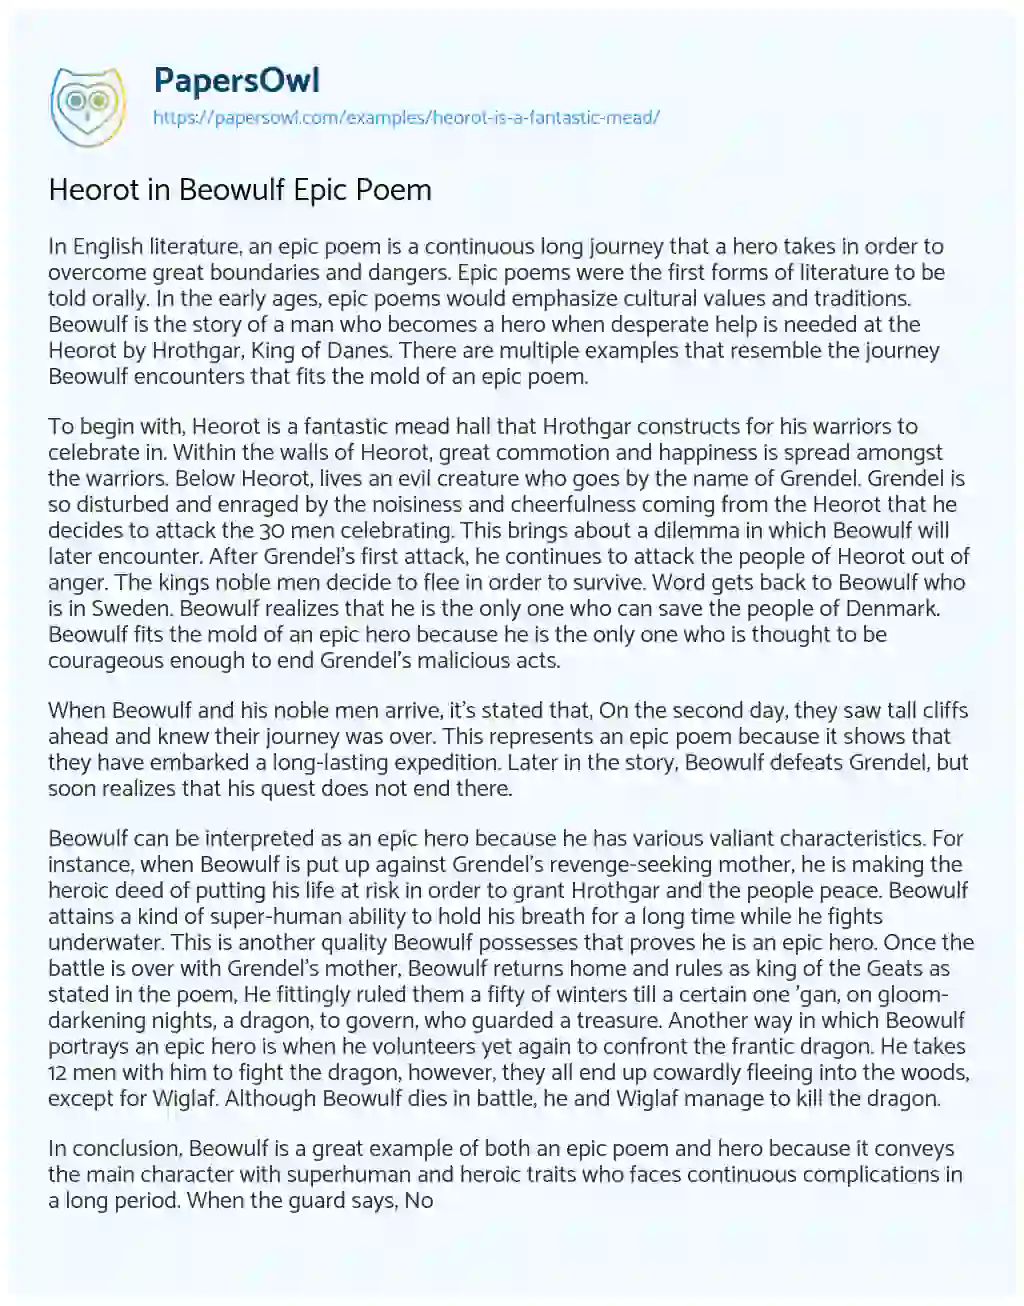 Essay on Heorot in Beowulf Epic Poem